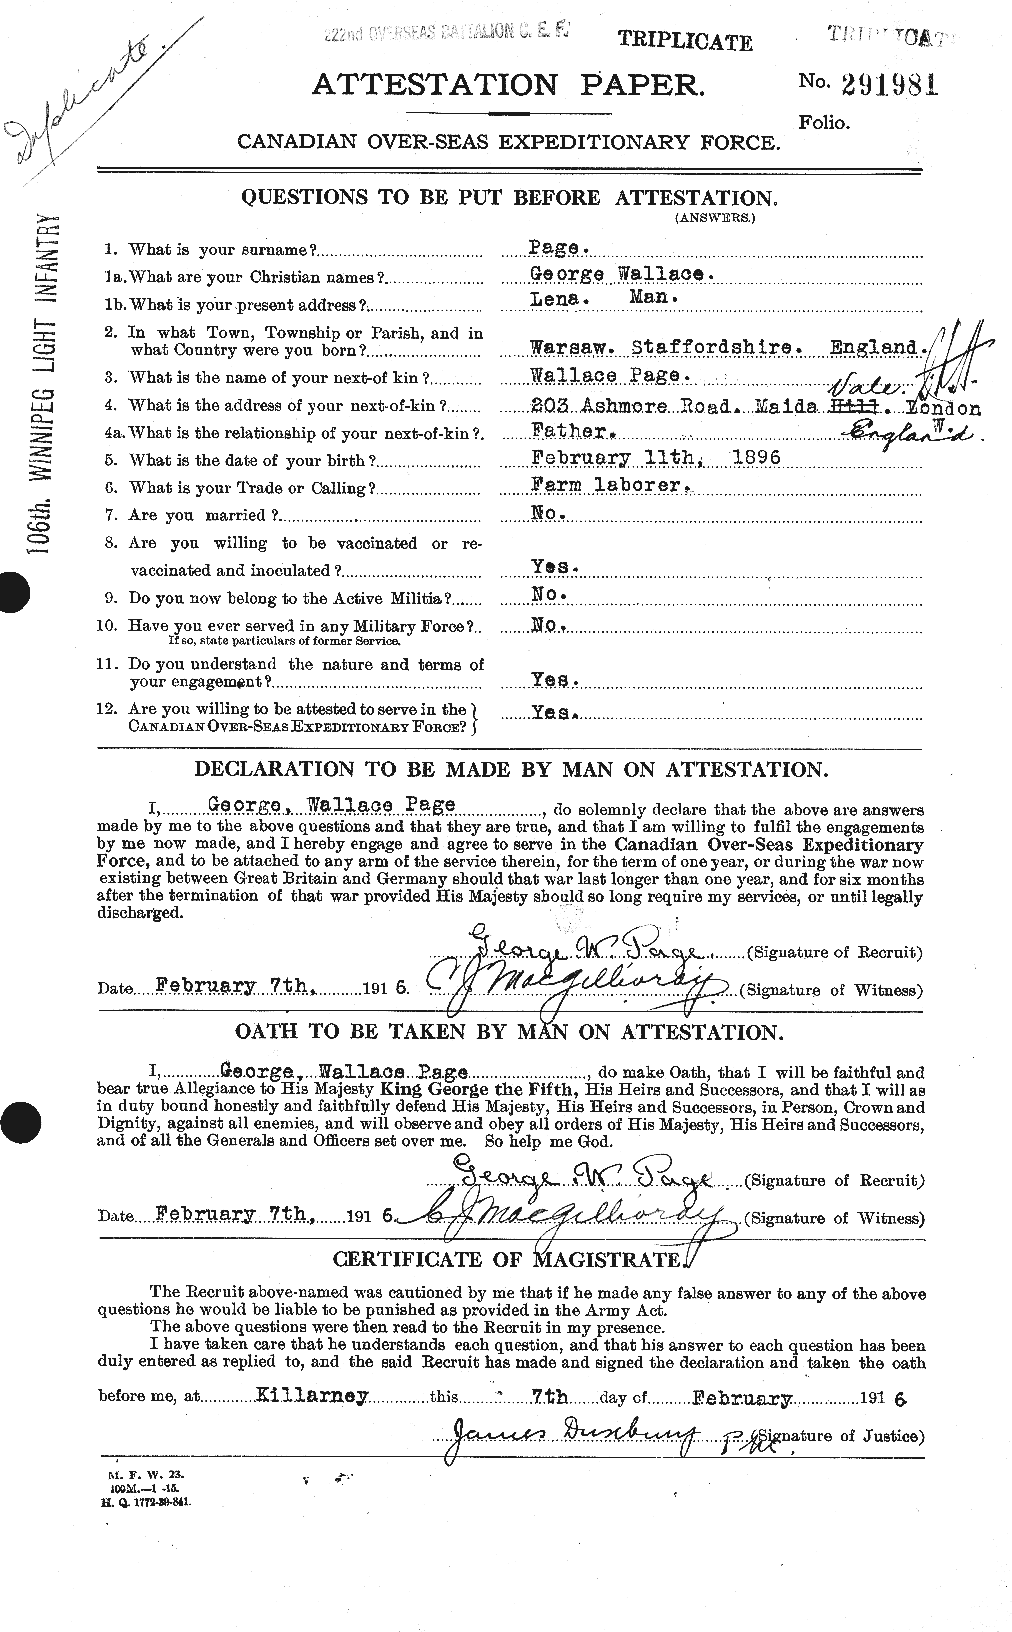 Personnel Records of the First World War - CEF 562111a